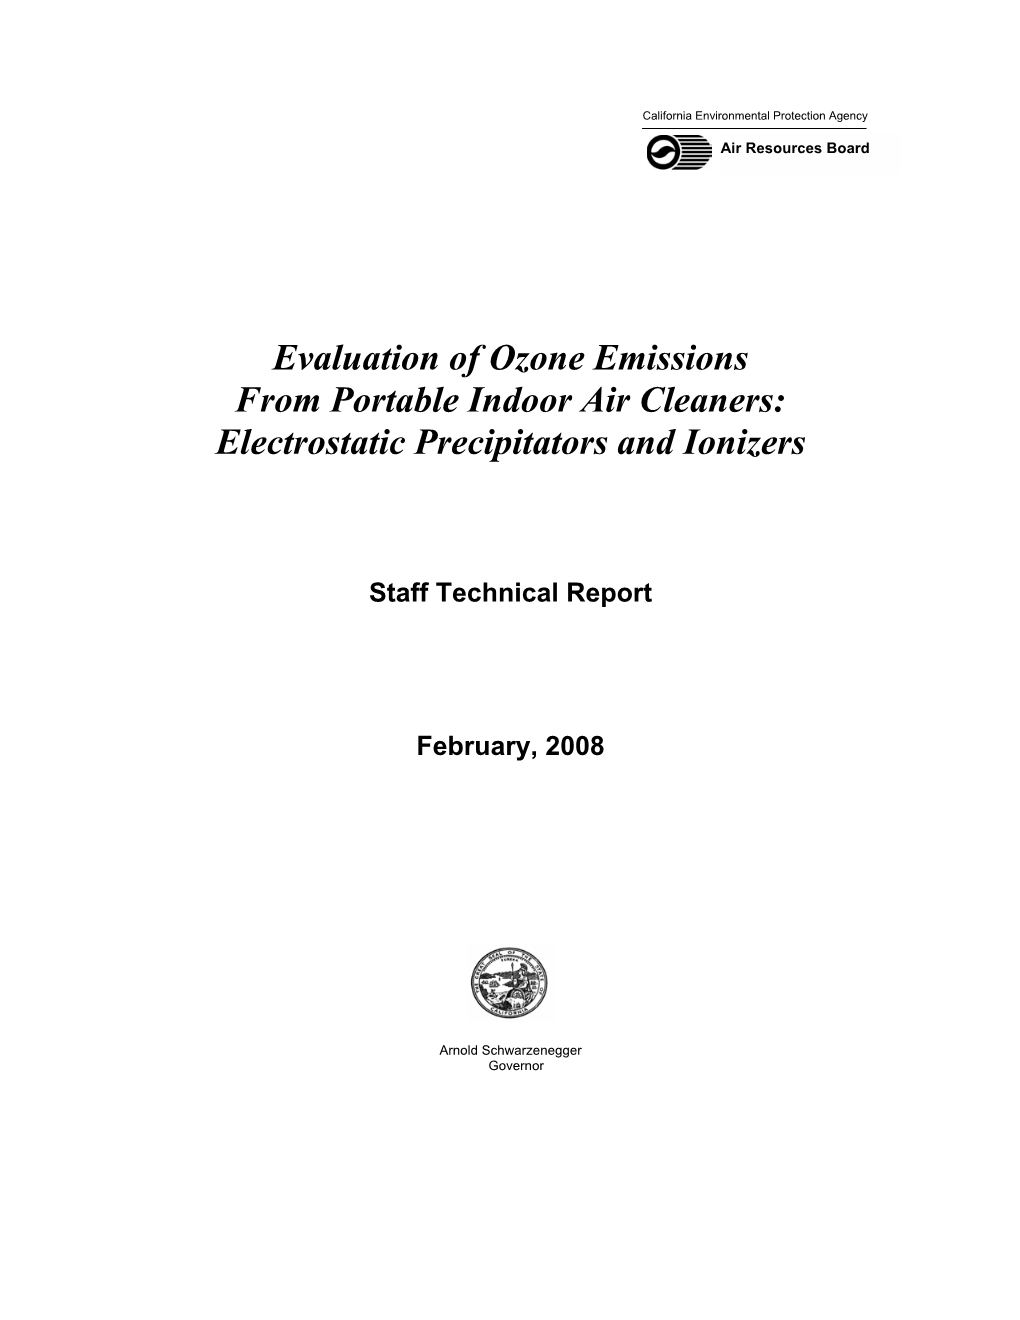 Evaluation of Ozone Emissions from Portable Indoor Air Cleaners: Electrostatic Precipitators and Ionizers